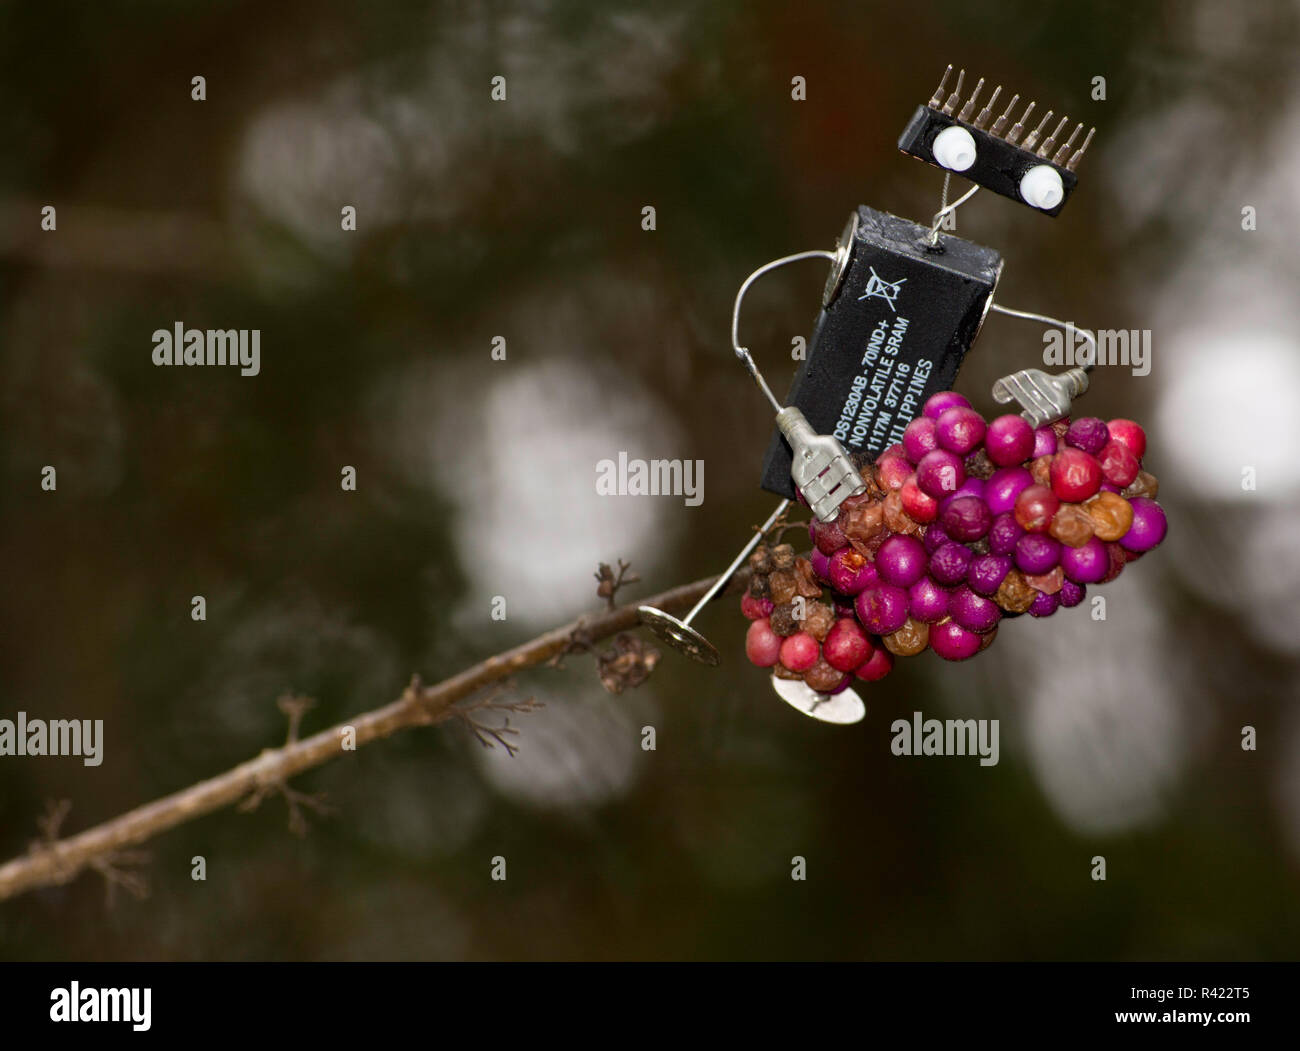 Robotic character out on a limb full of berries Stock Photo